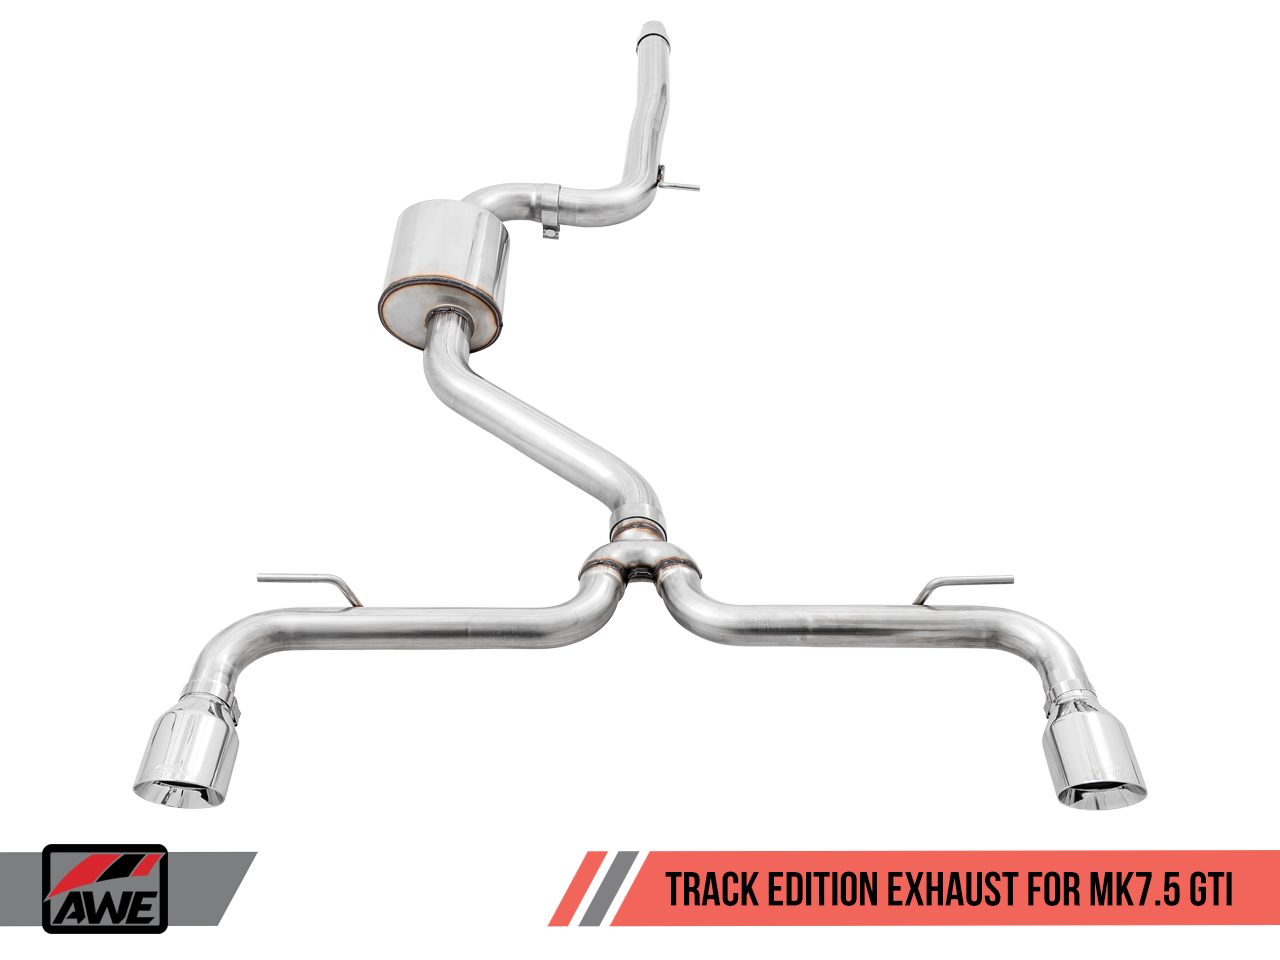 AWE Track Edition Exhaust for VW MK7.5 GTI - Motorsports LA